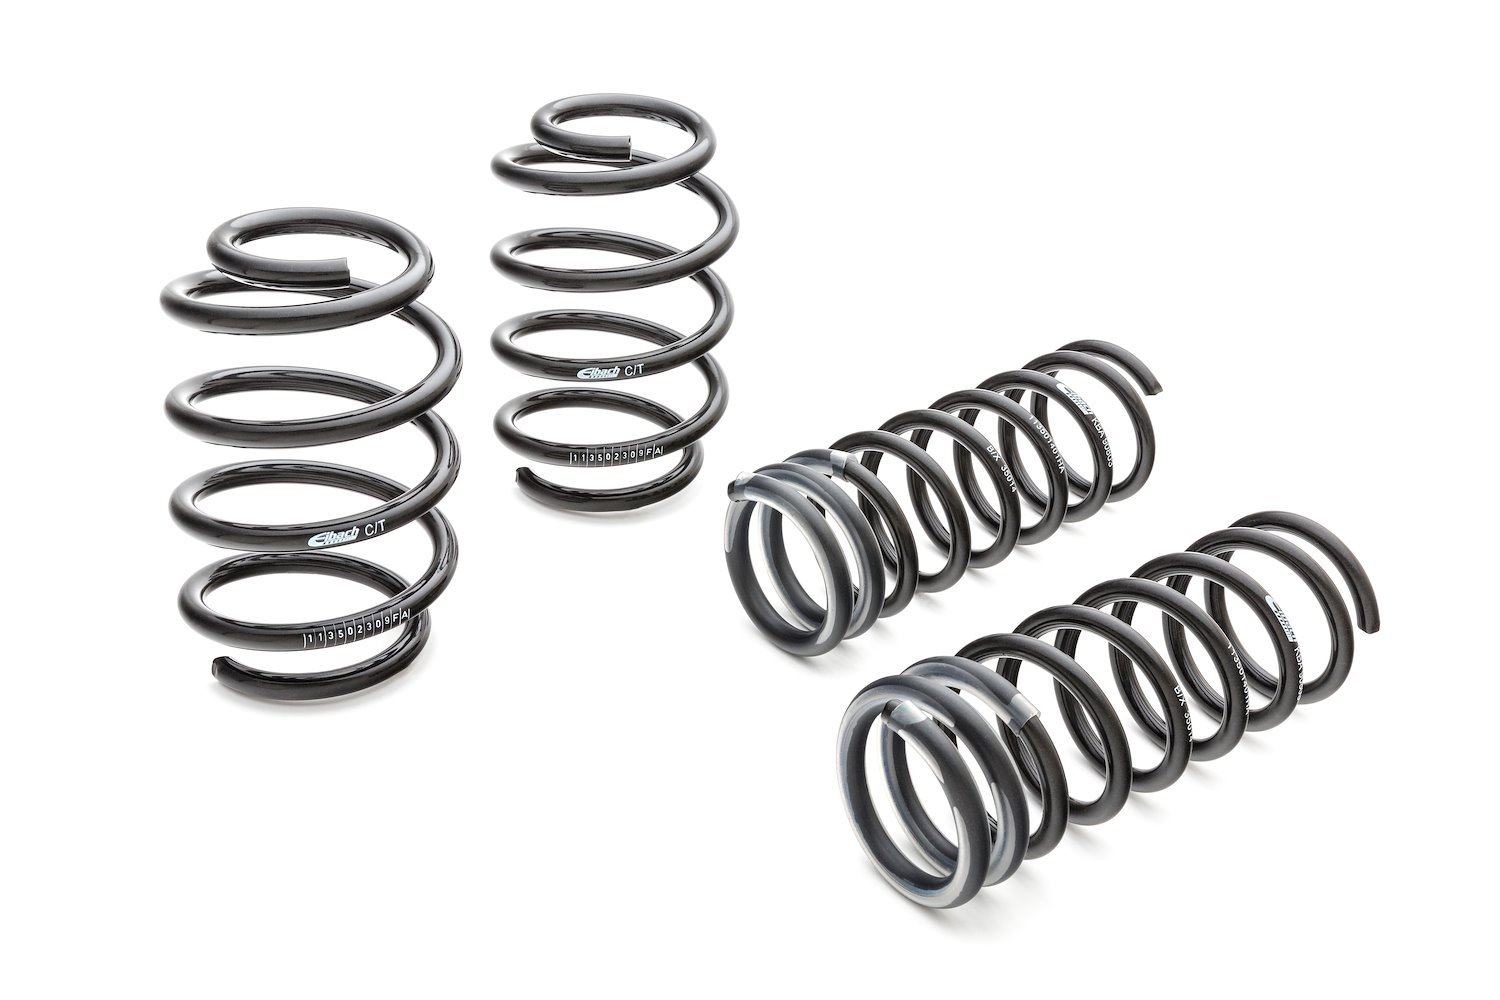 35145.140 Pro-Kit Lowering Springs 2015-2016 Mustang GT Coupe - 1.100 in. Front/1 in. Rear Drop